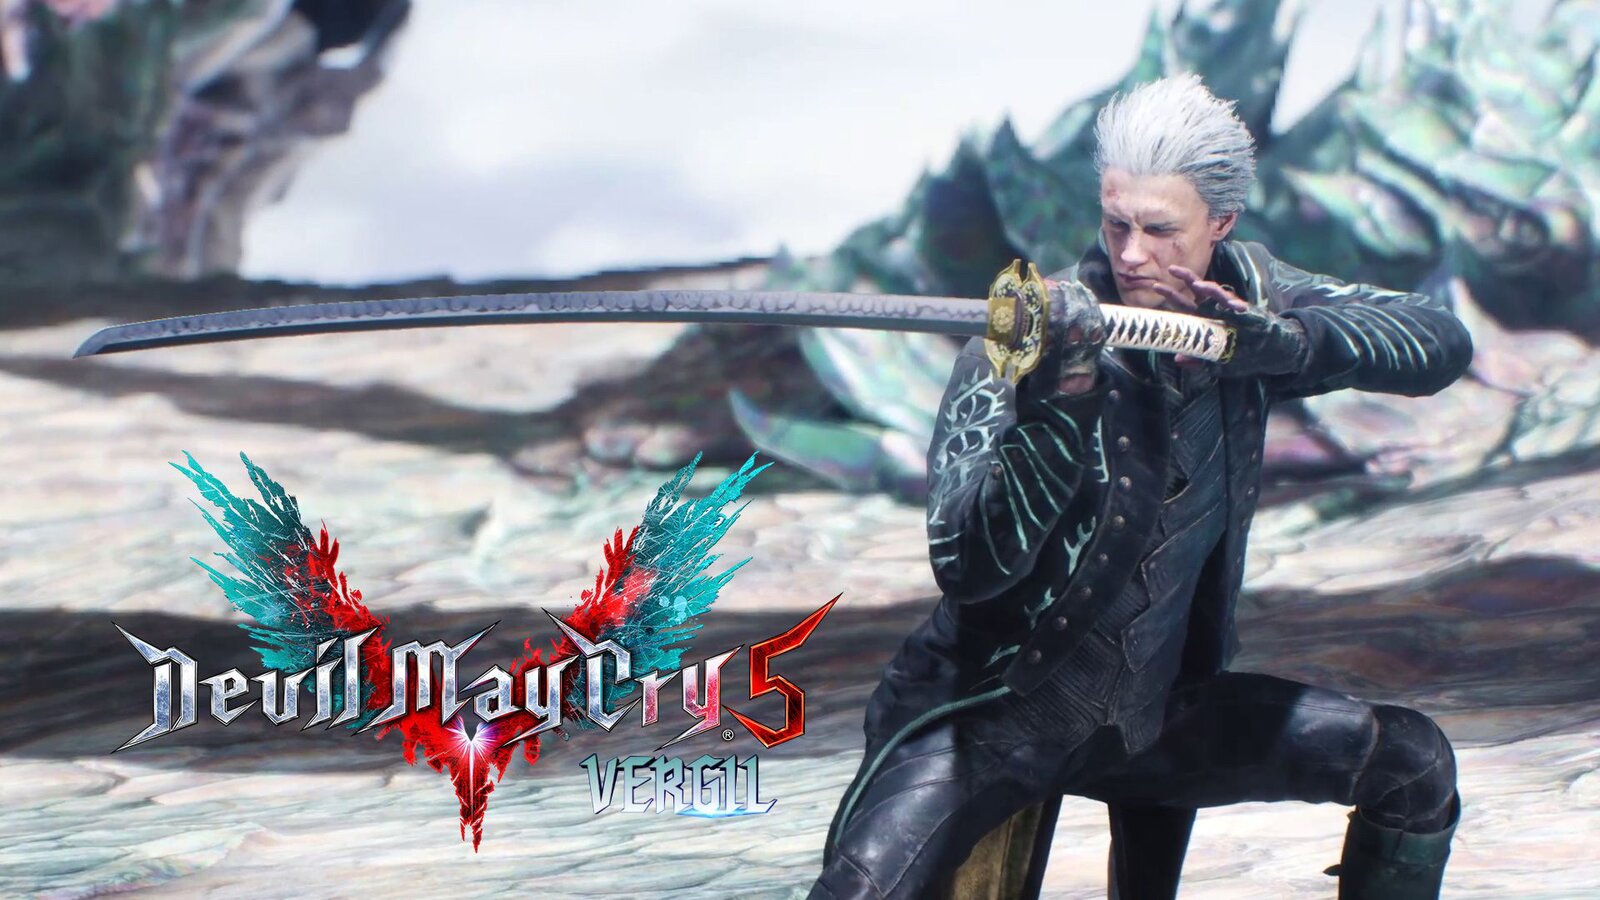 Devil May Cry 5: Playable Character - Vergil